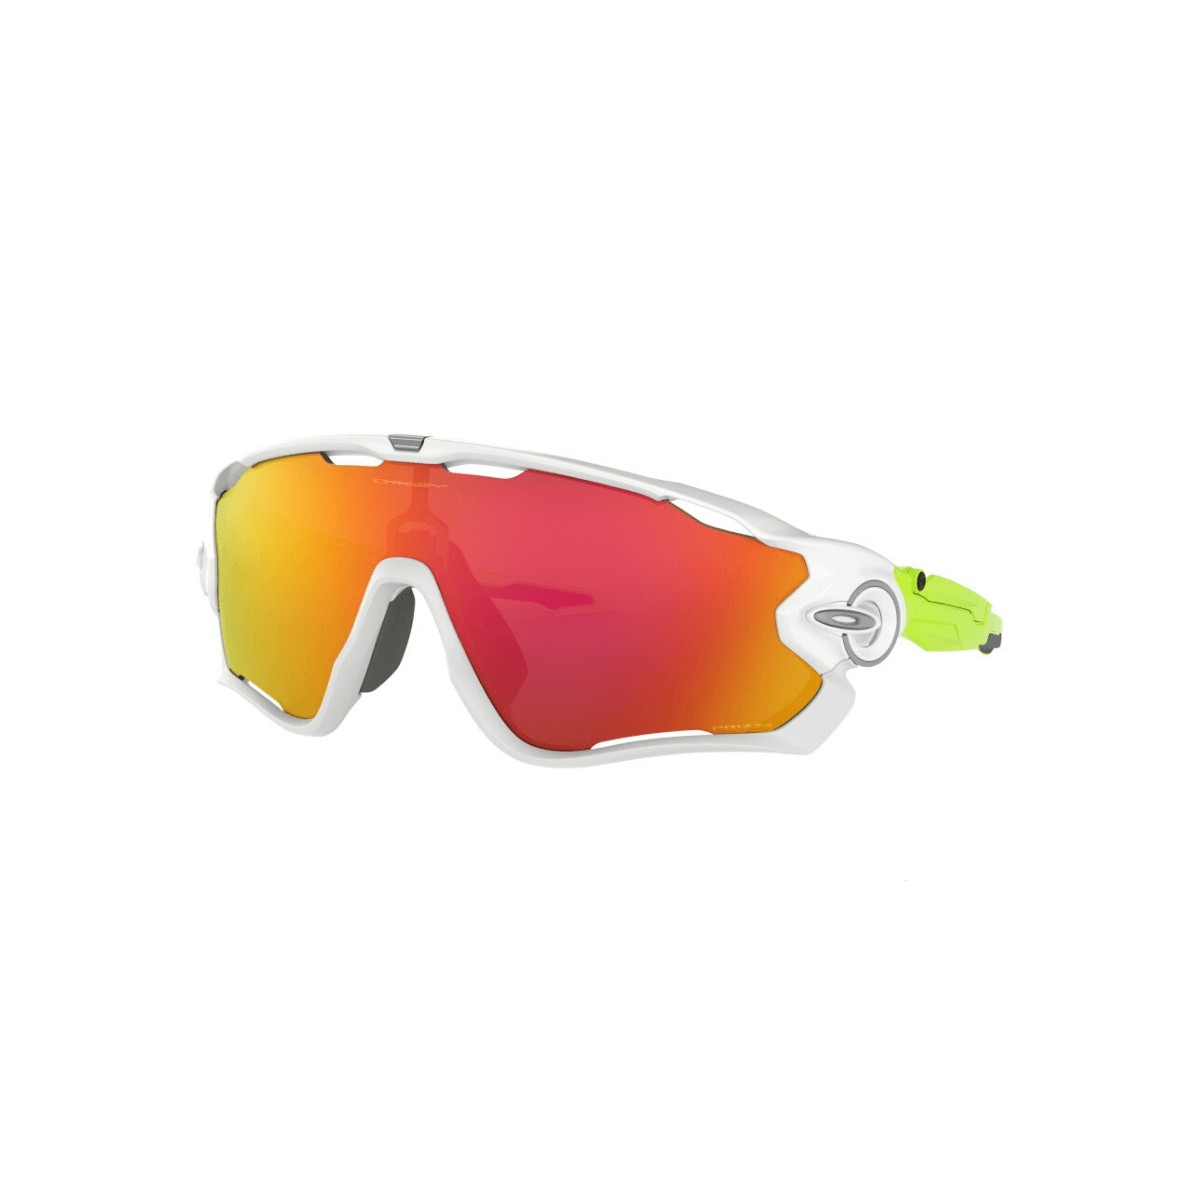 all4cycling occhiali oakley jawbreaker origins collection polished white prizm ruby donna